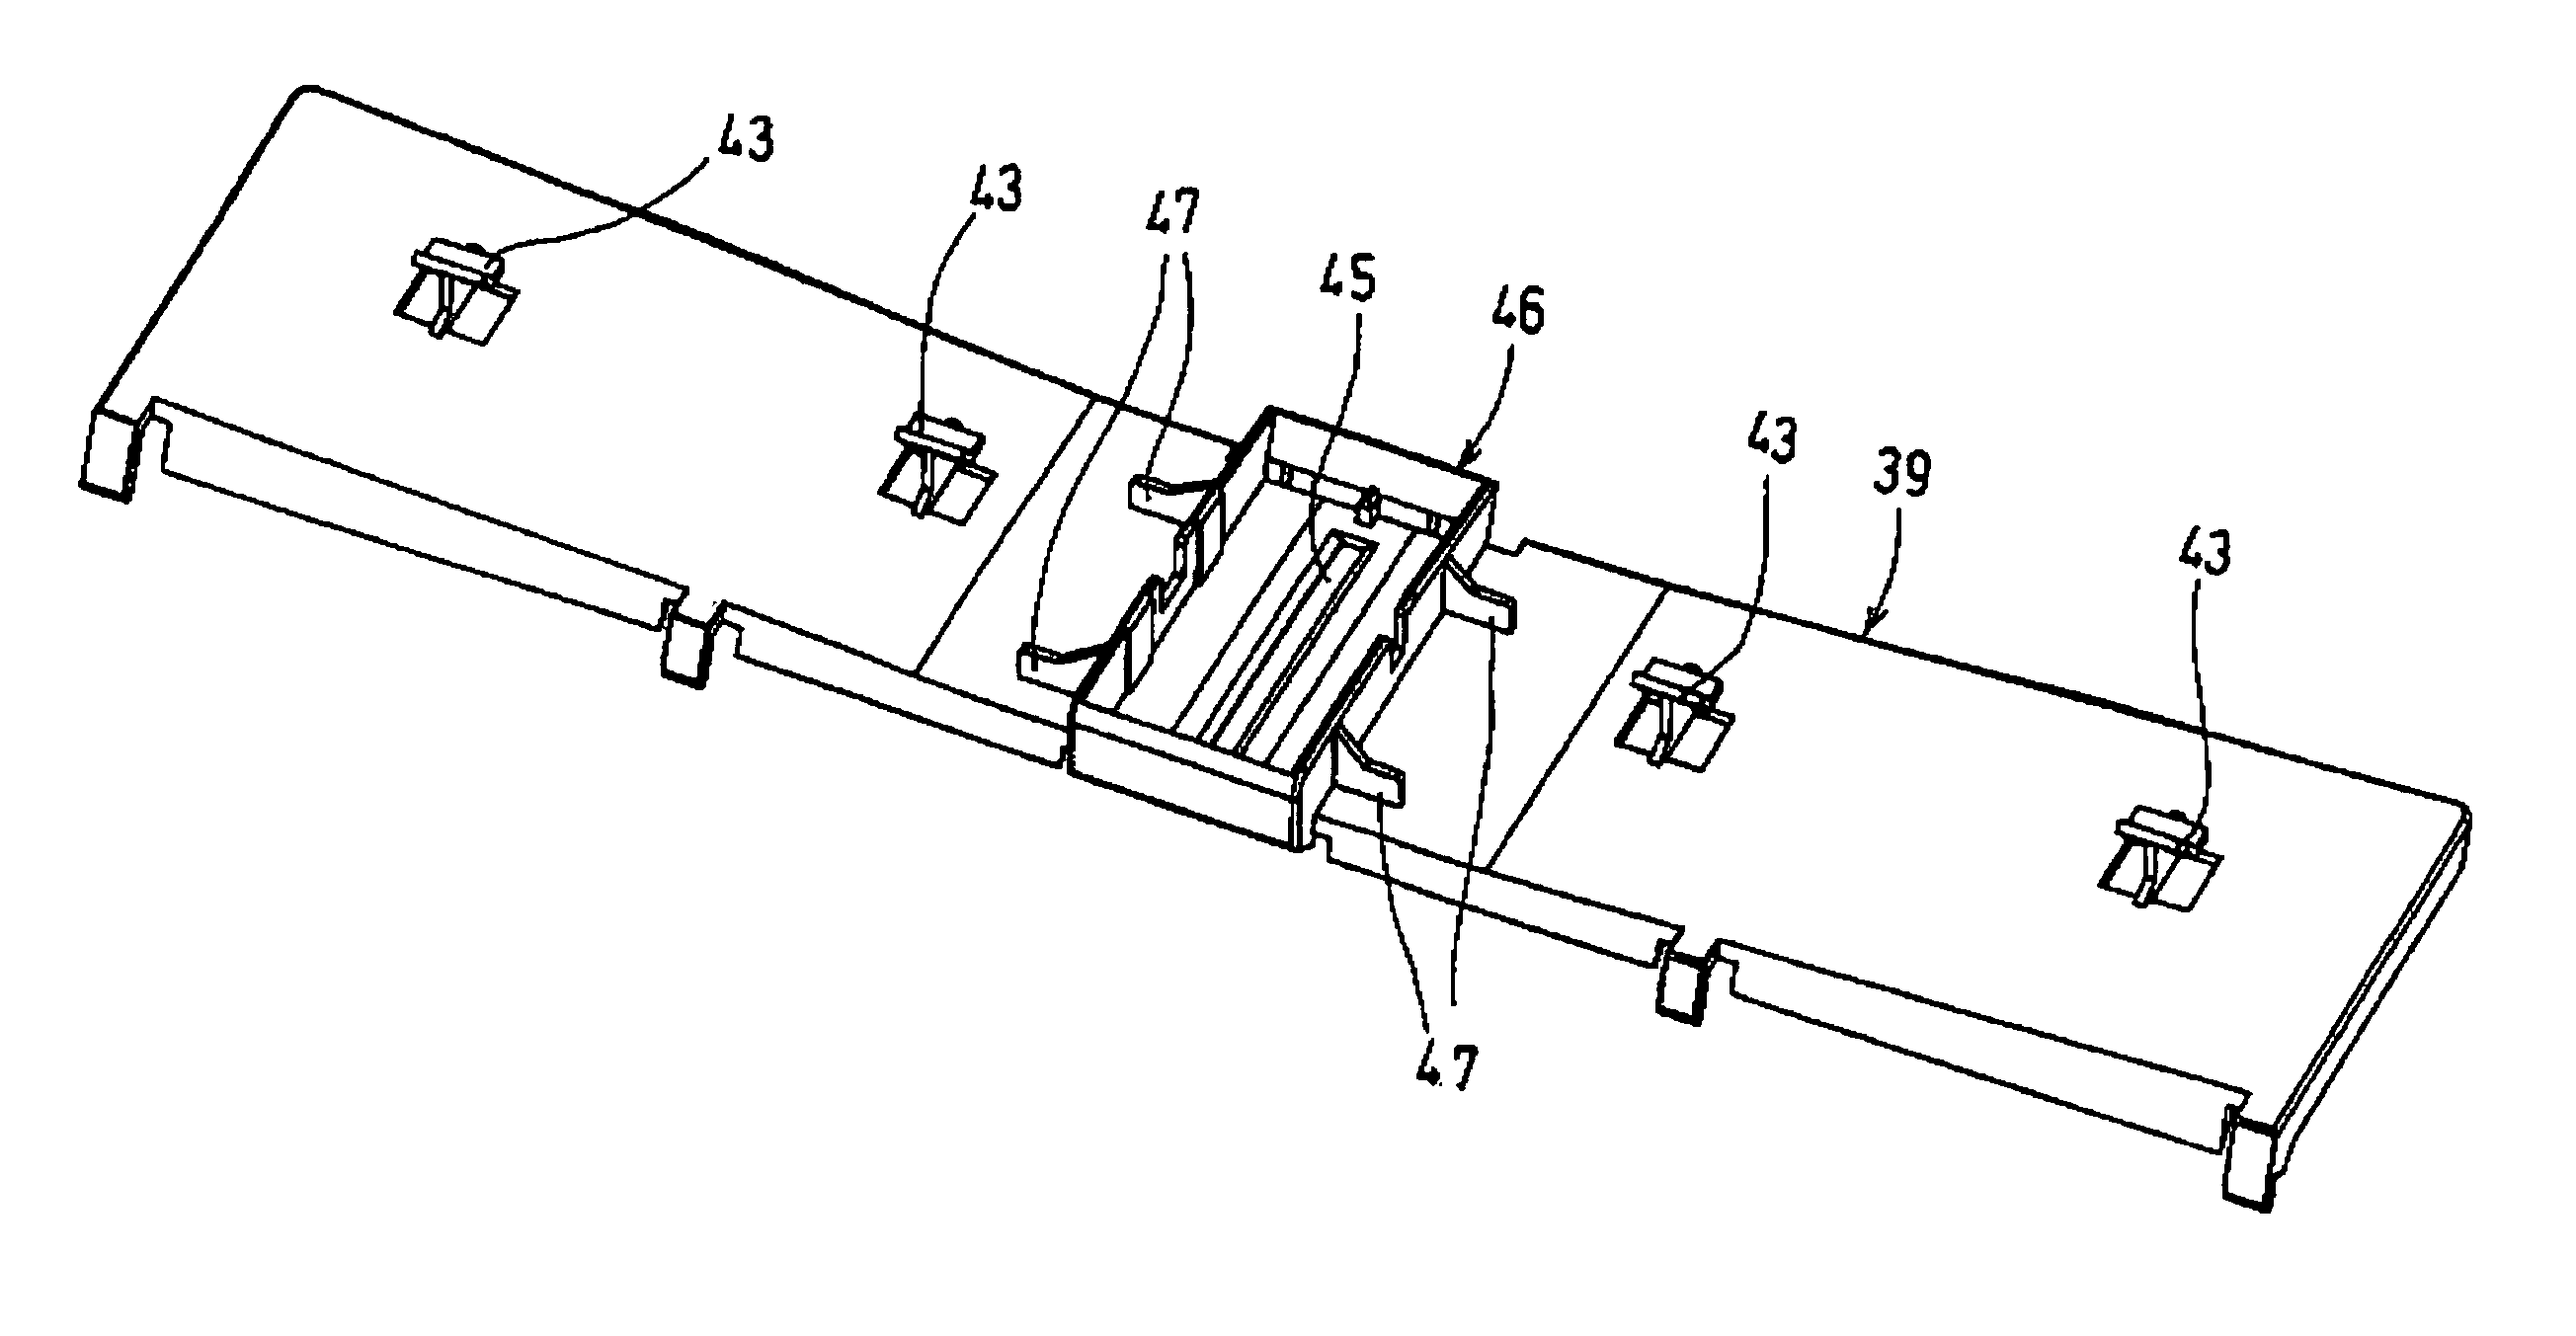 Sheet-supply cassette with an inclined separate plate, and image recording apparatus including sheet-supply cassette installed with a snap-action device